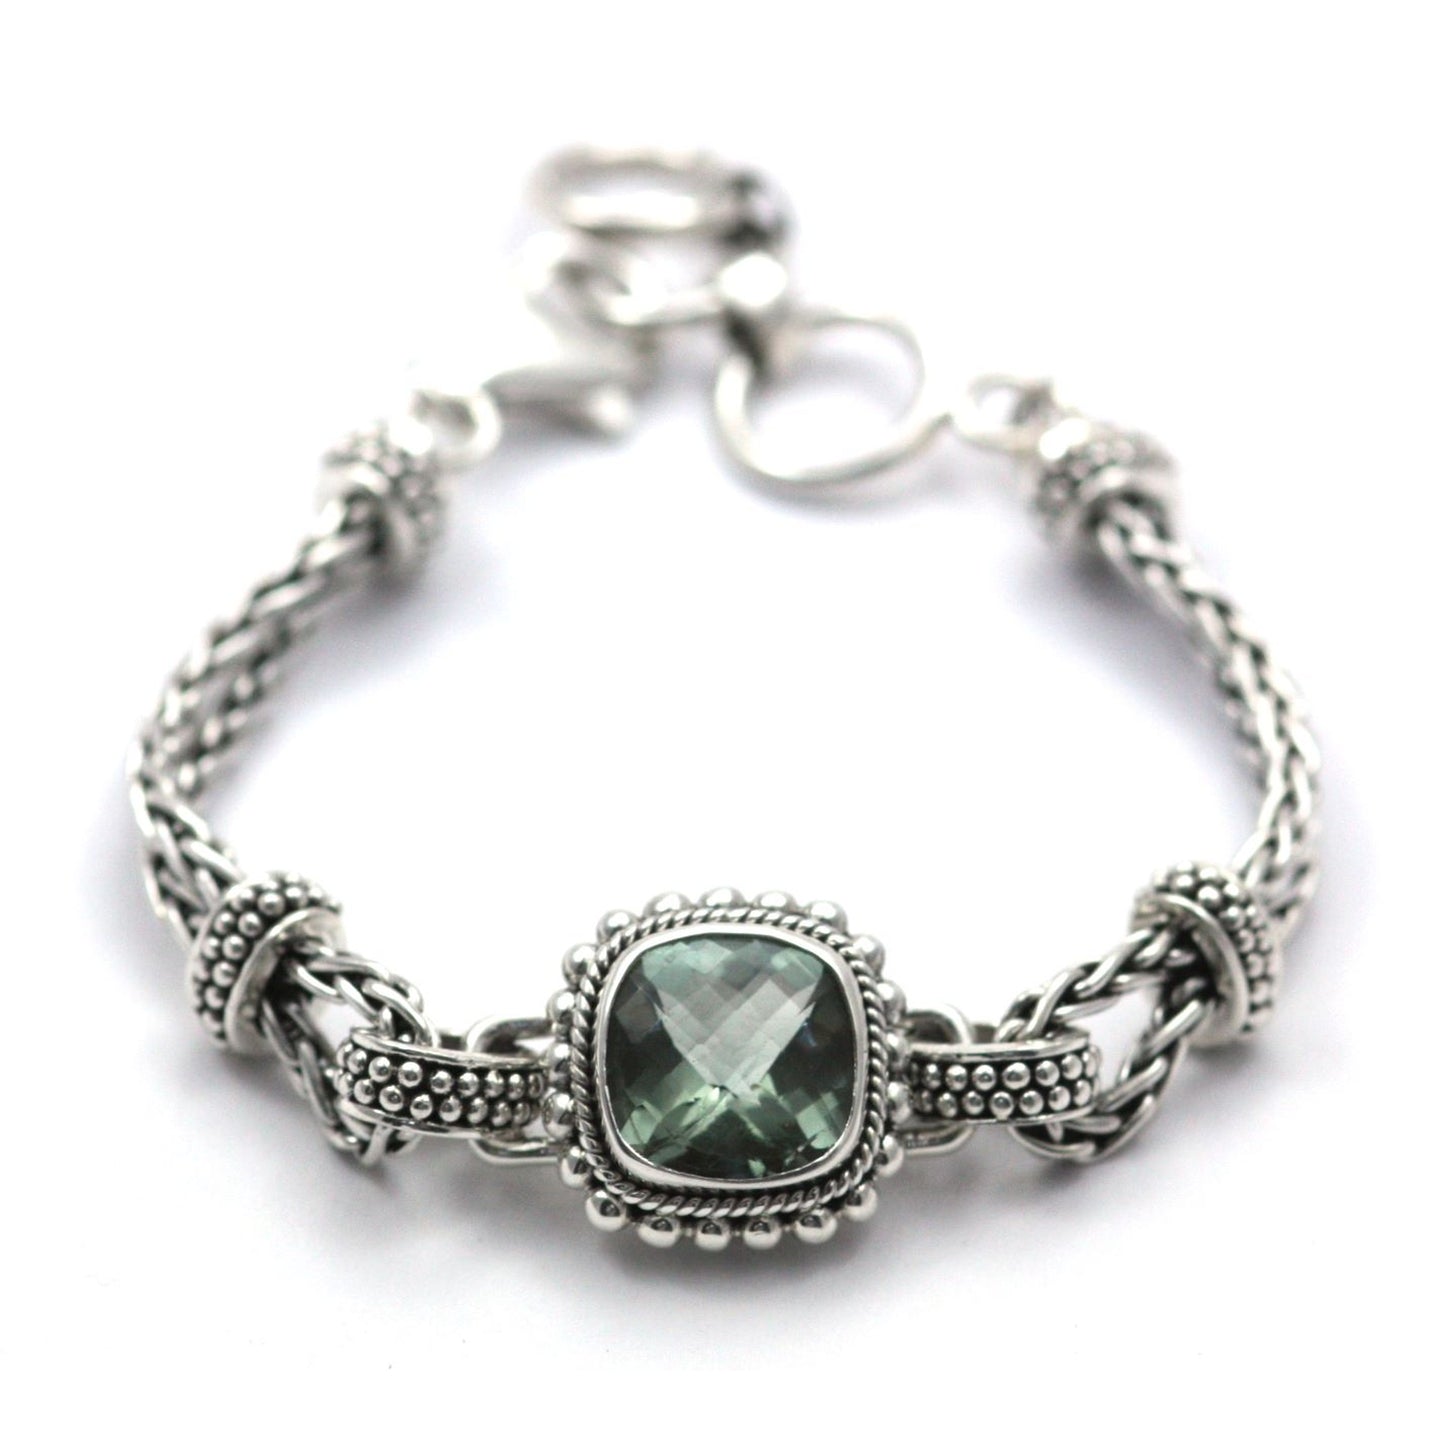 Silver bracelet with wheat chain arms and a centered station with one faceted green amethyst gemstone.